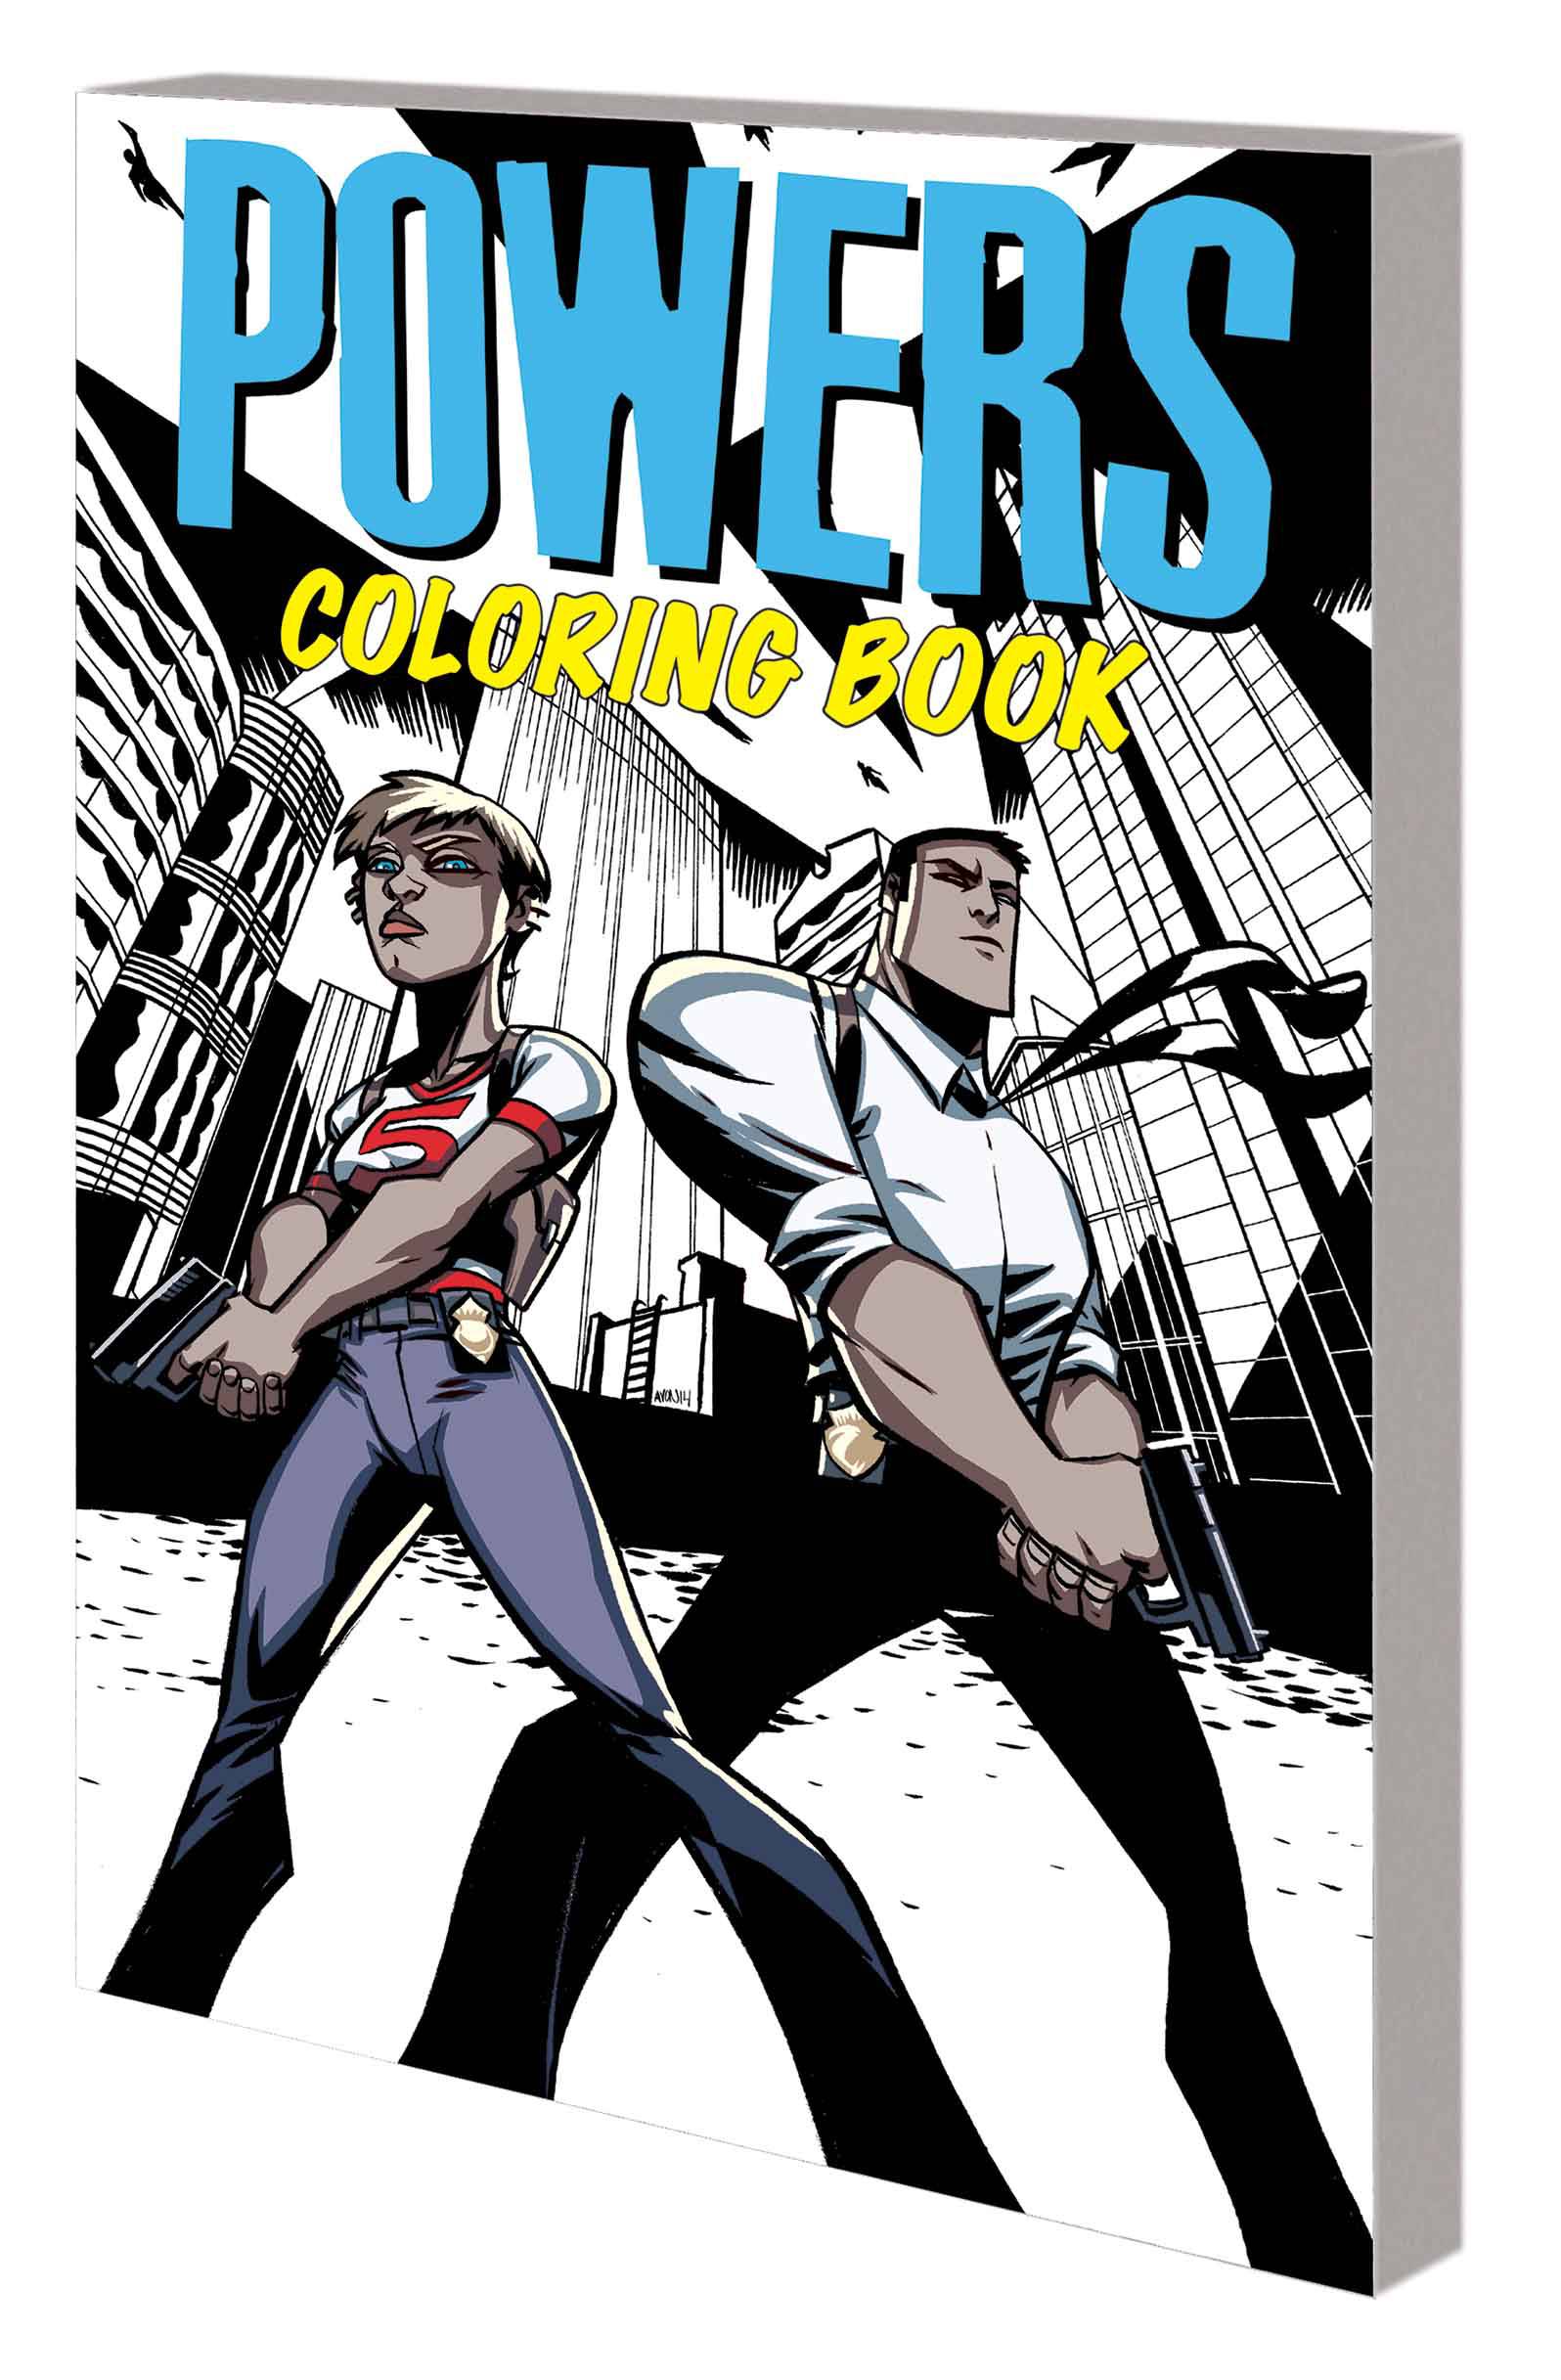 Powers Coloring Book Graphic Novel